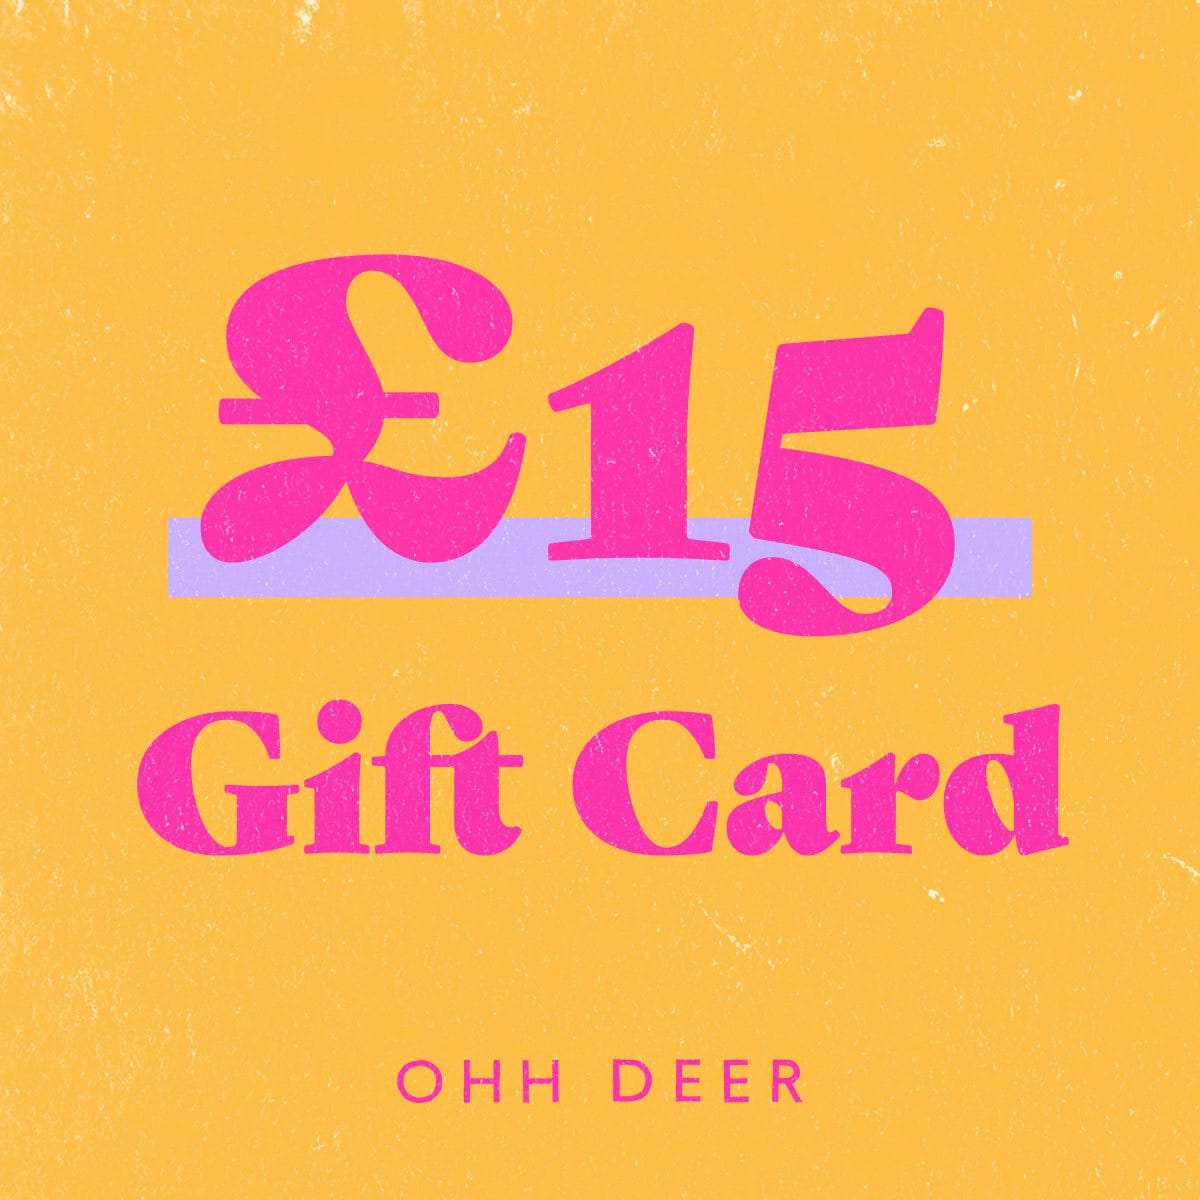 E-Gift Card (Email Delivery), PS15.00 GBP